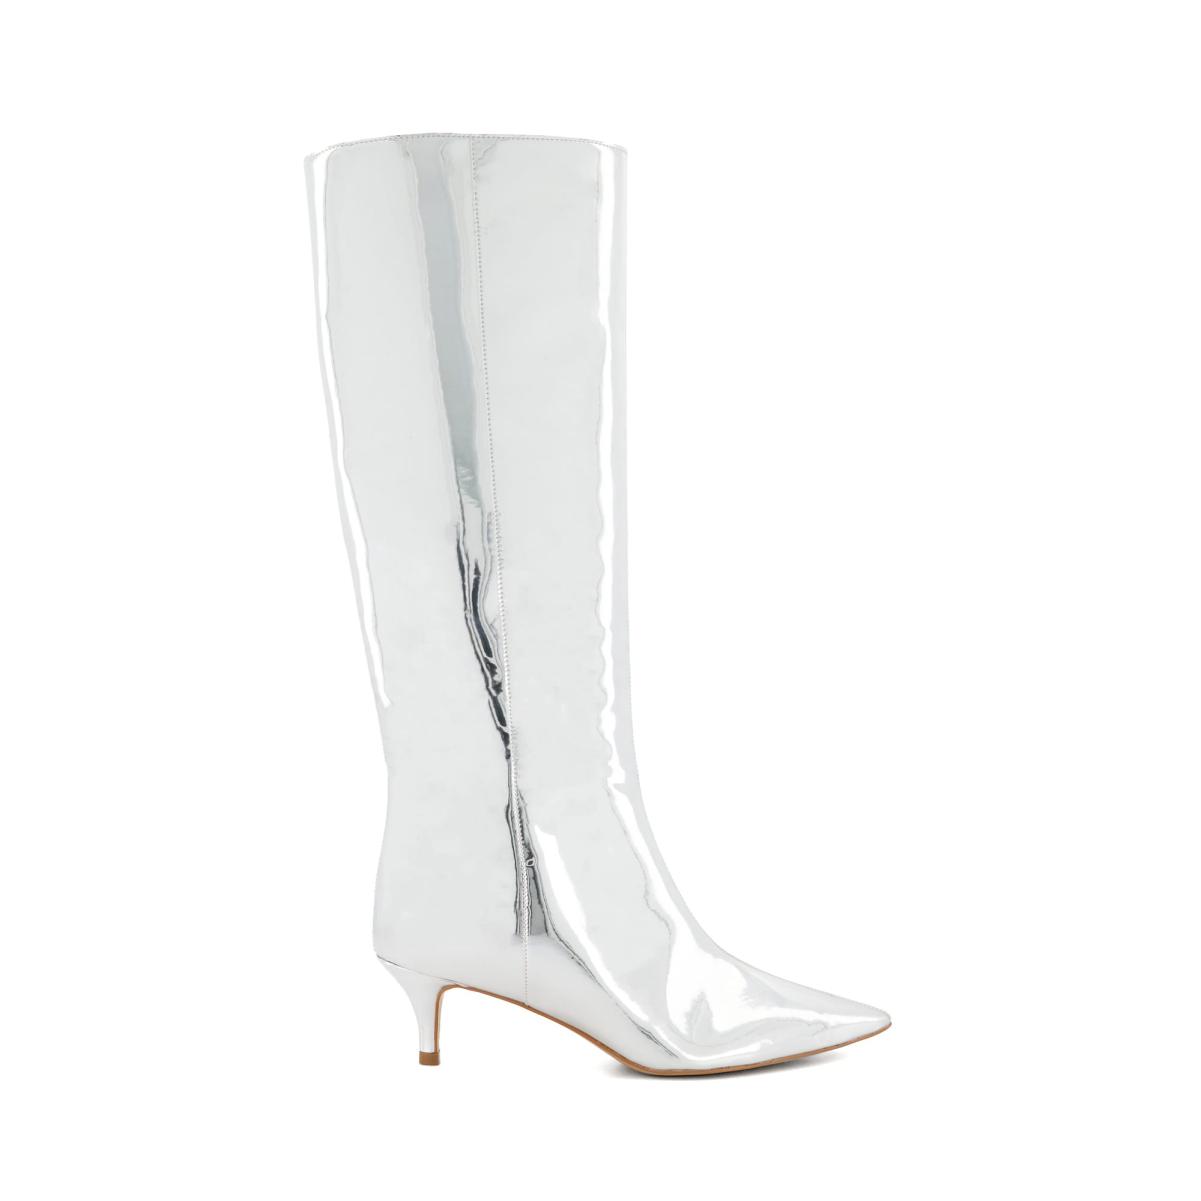 Smooth - Silver Dune London Knee High Boots Women - 3